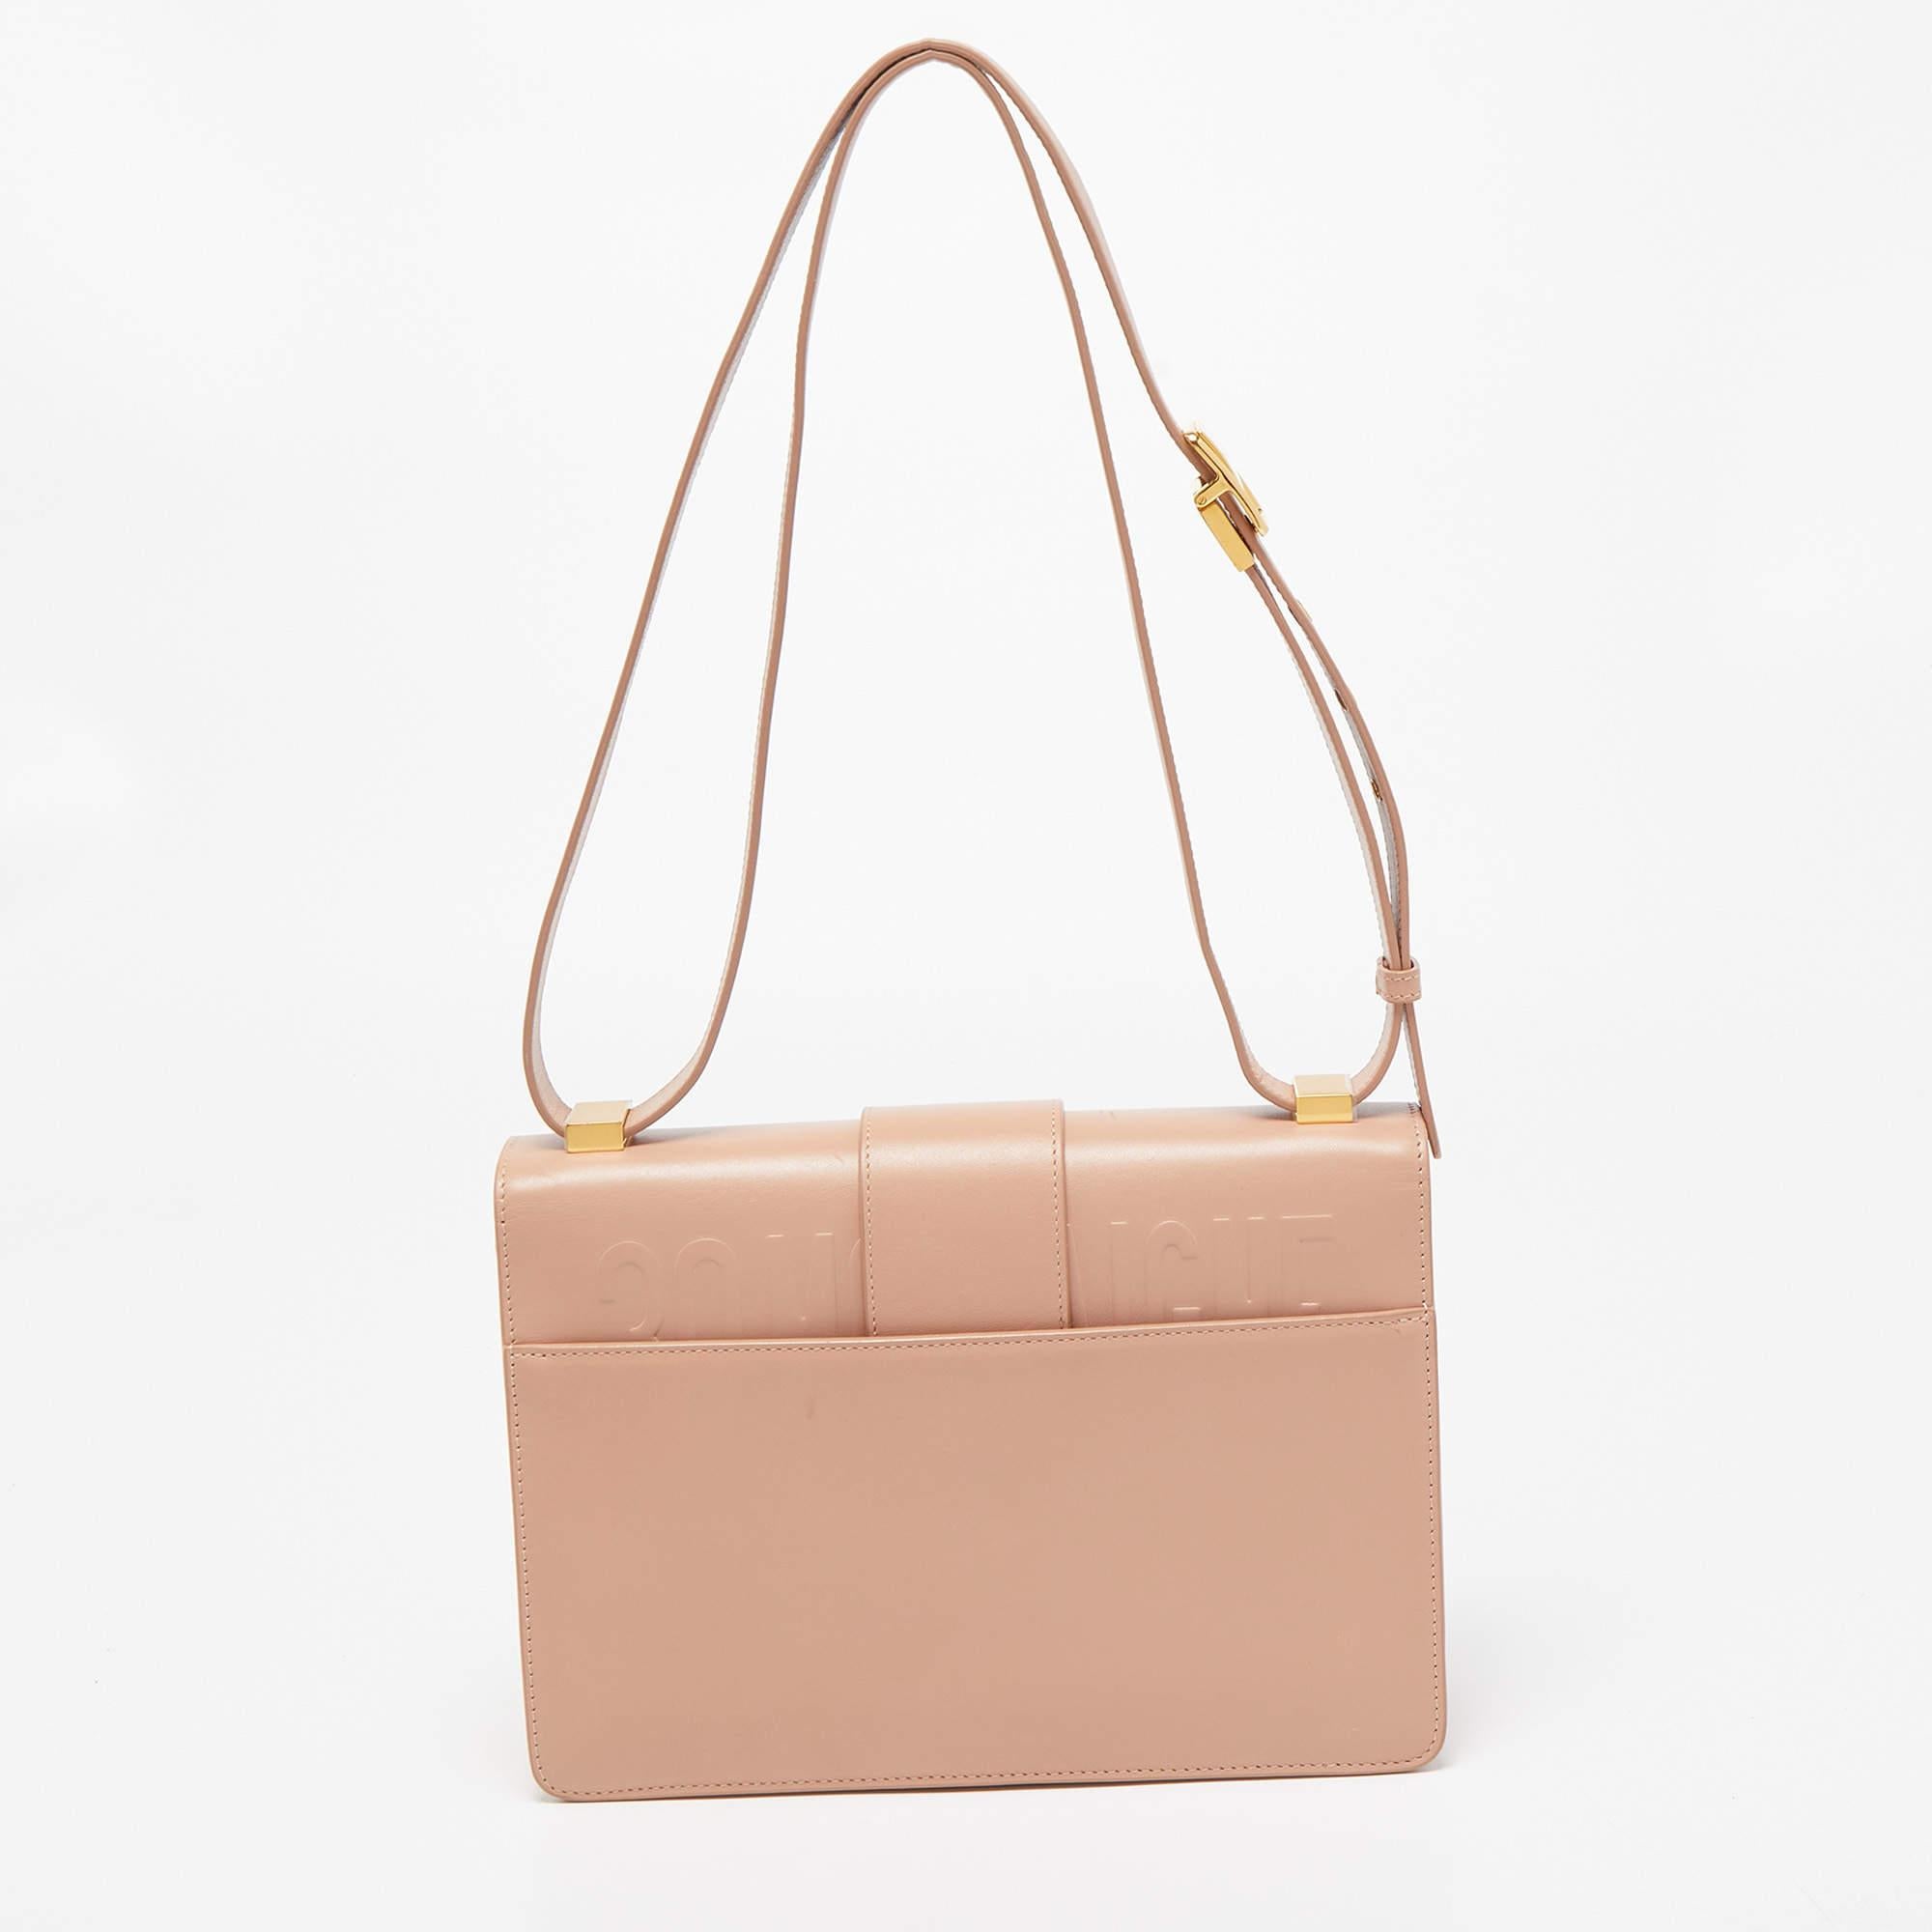 Inspired by the House's hallmark address, this Dior 30 Montaigne shoulder bag is the true embodiment of grace and luxury. The bag features a leather exterior and a gold-toned CD metal clasp on the front that derives its design from the seal of a